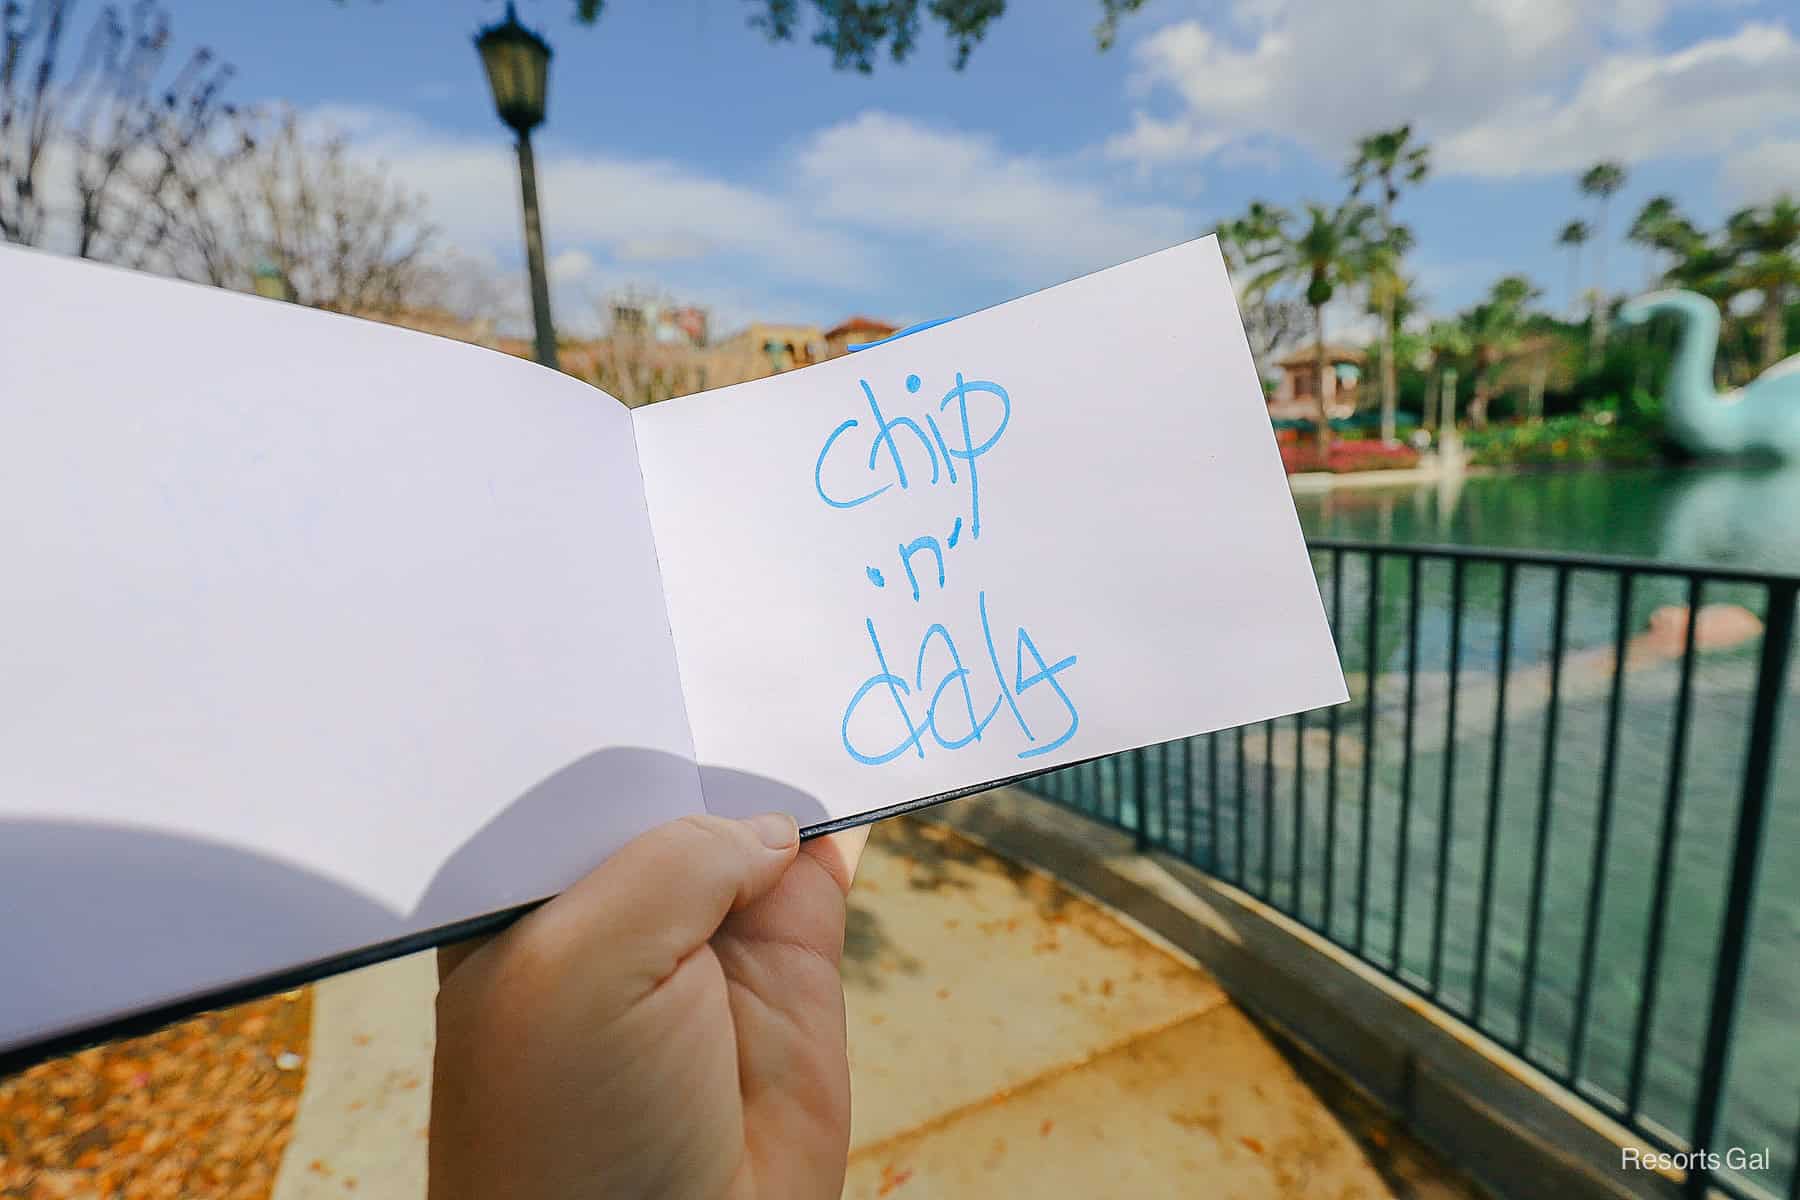 a hand holding an autograph book open with Chip n' Dale's signature 